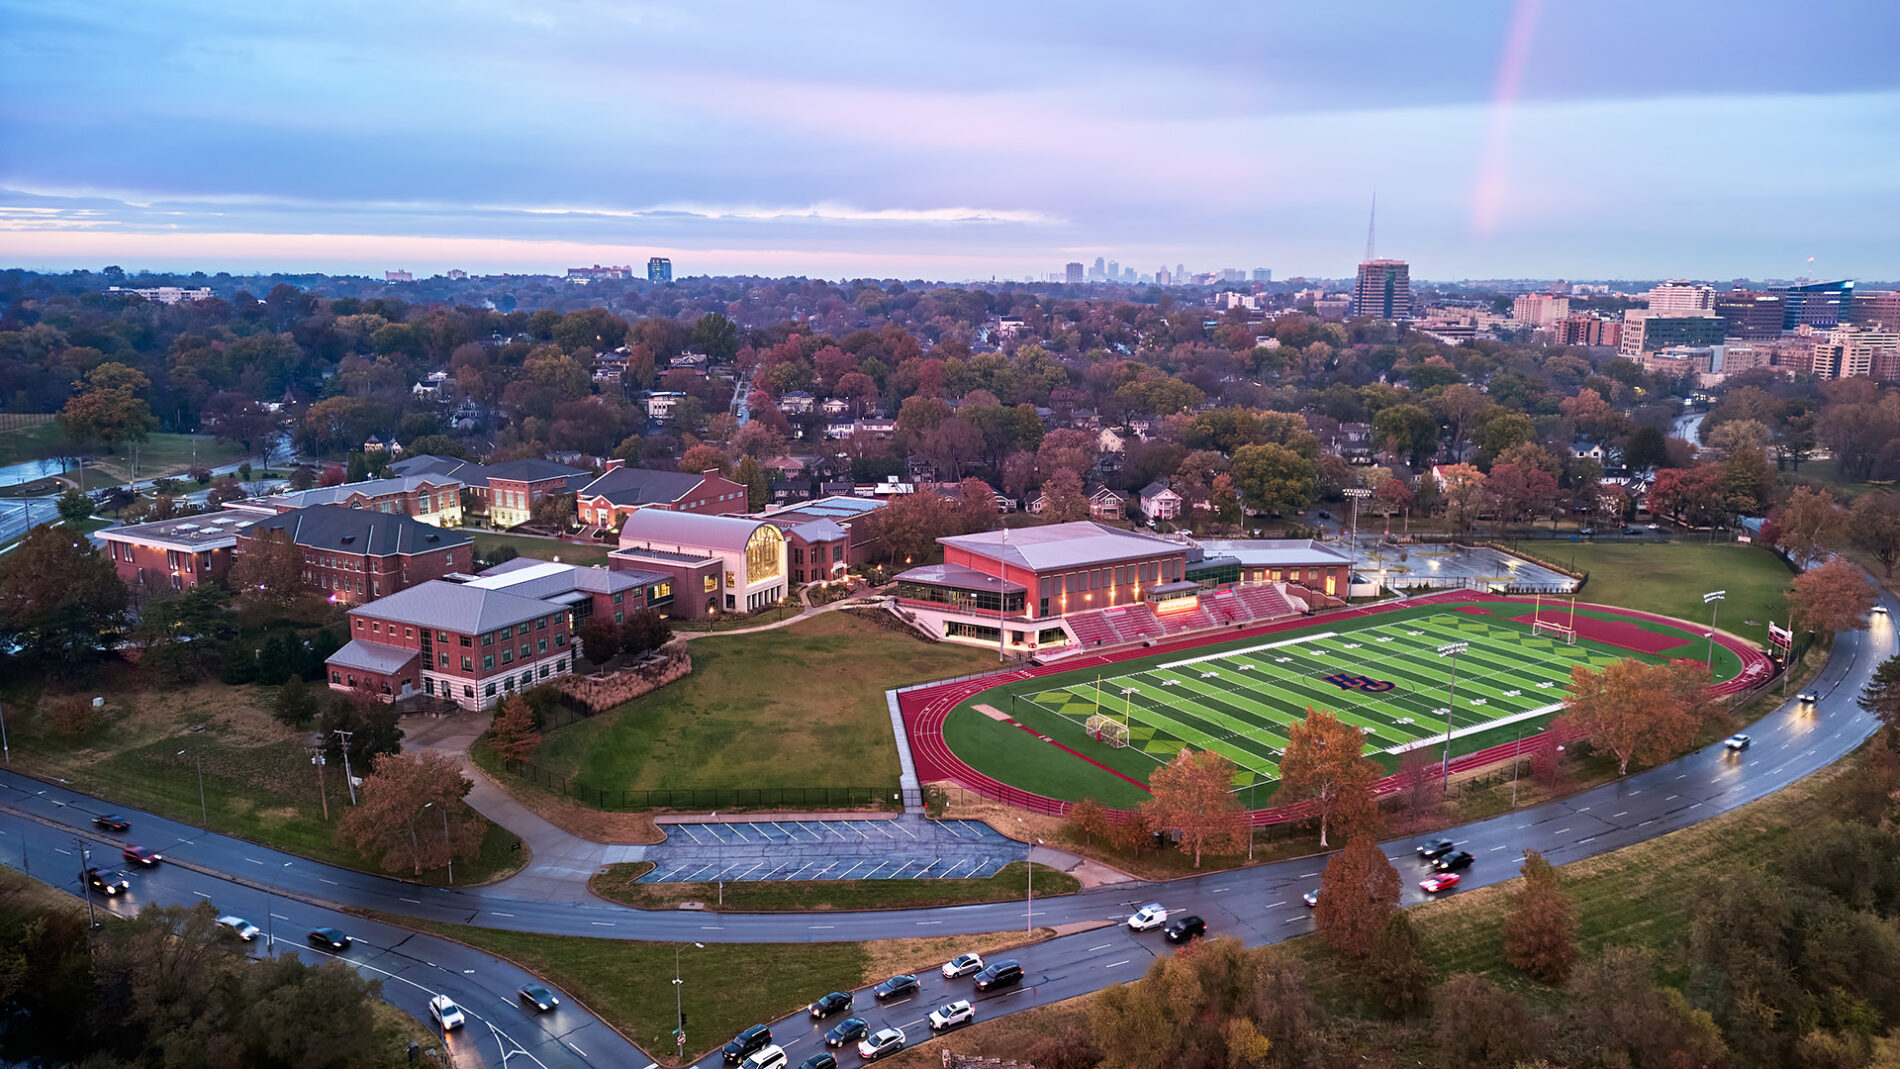 An aerial view of the Pembroke Hill School Campus and athletics